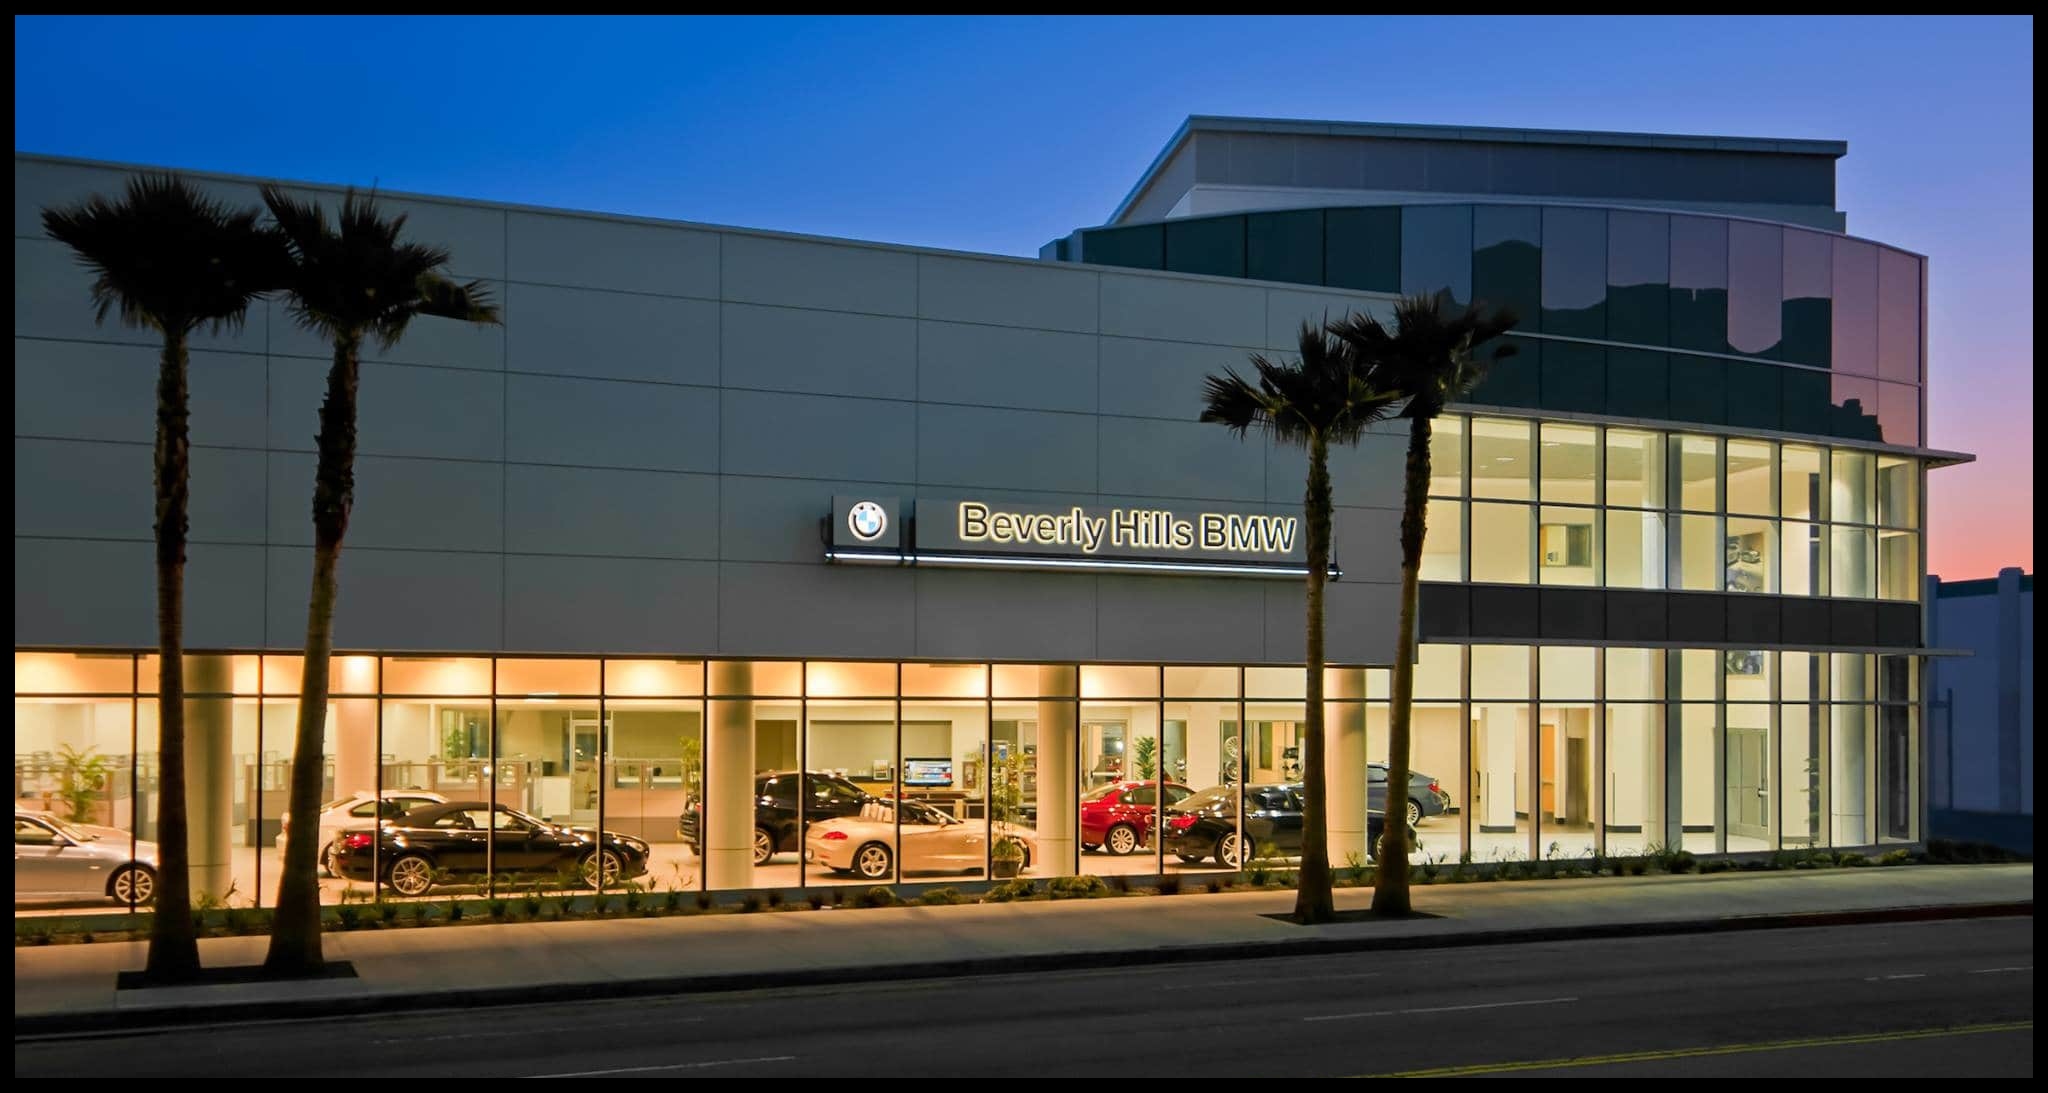 ABOUT BEVERLY HILLS BMW IN LOS ANGELES CA